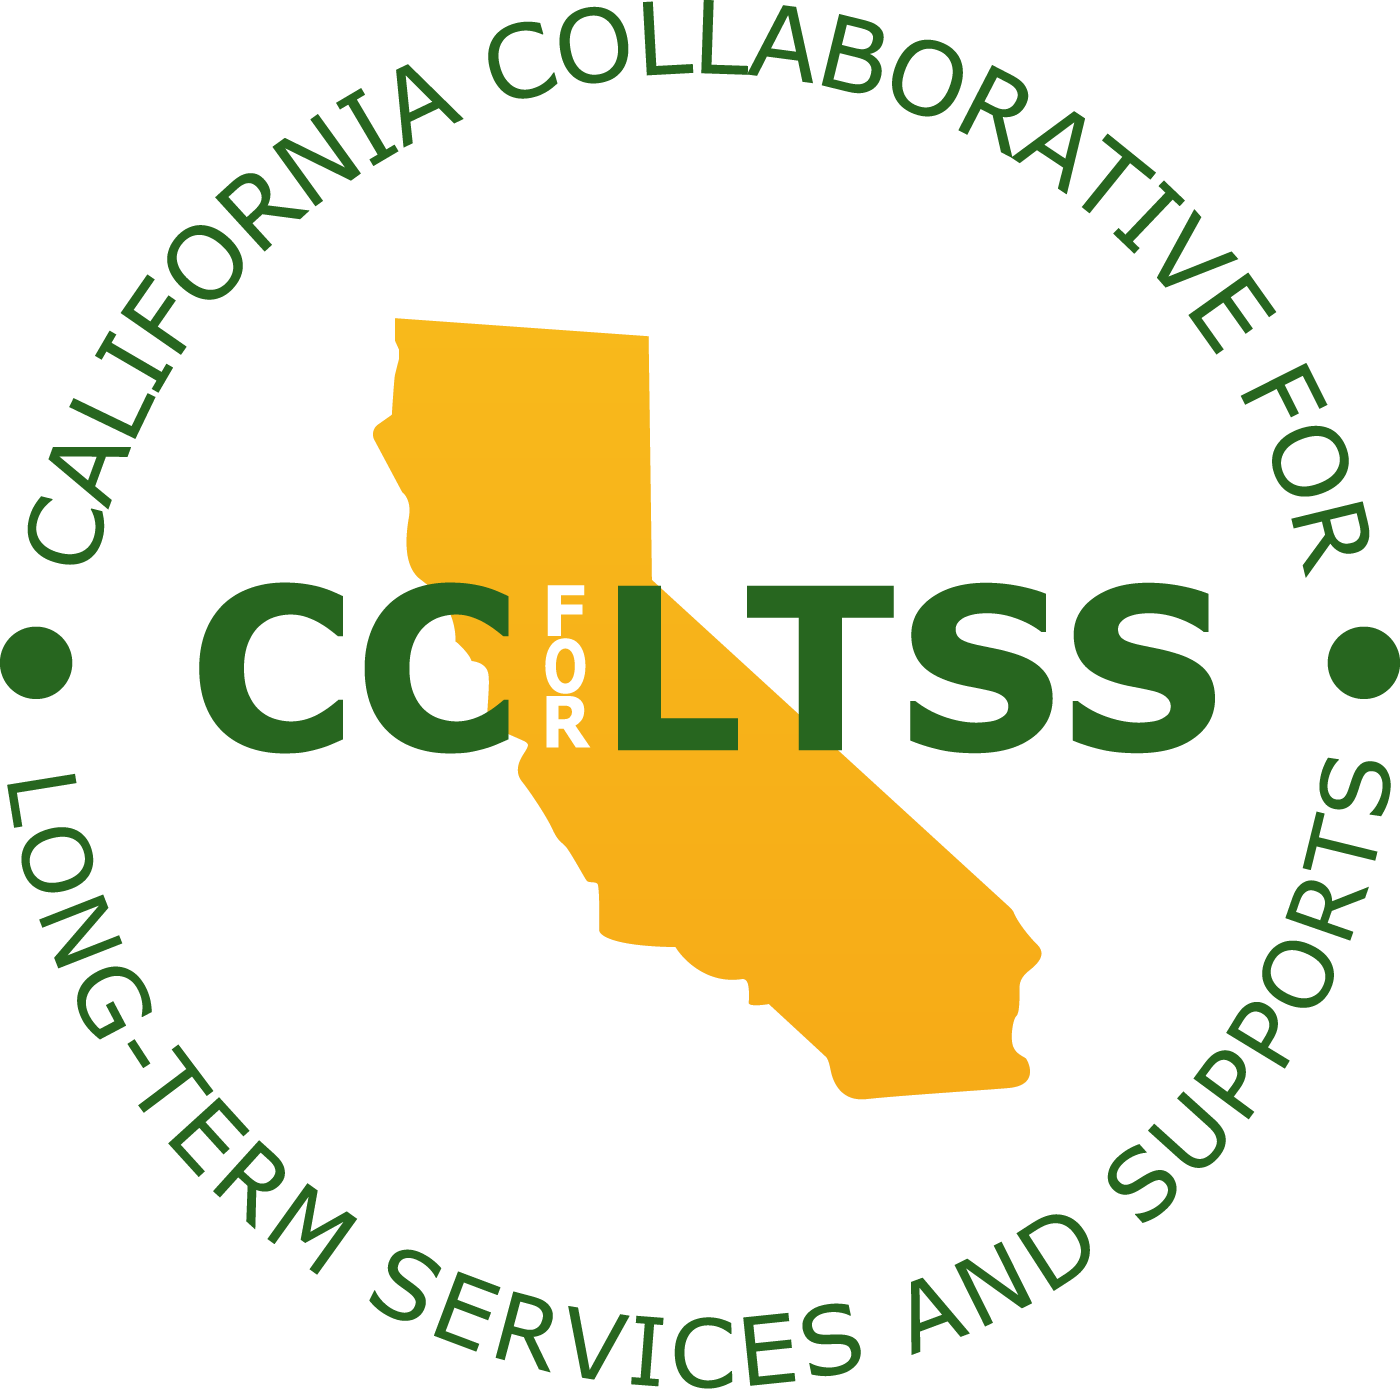 Logo for the California Collaborative for Long-Term Services and Supports (CCLTSS).